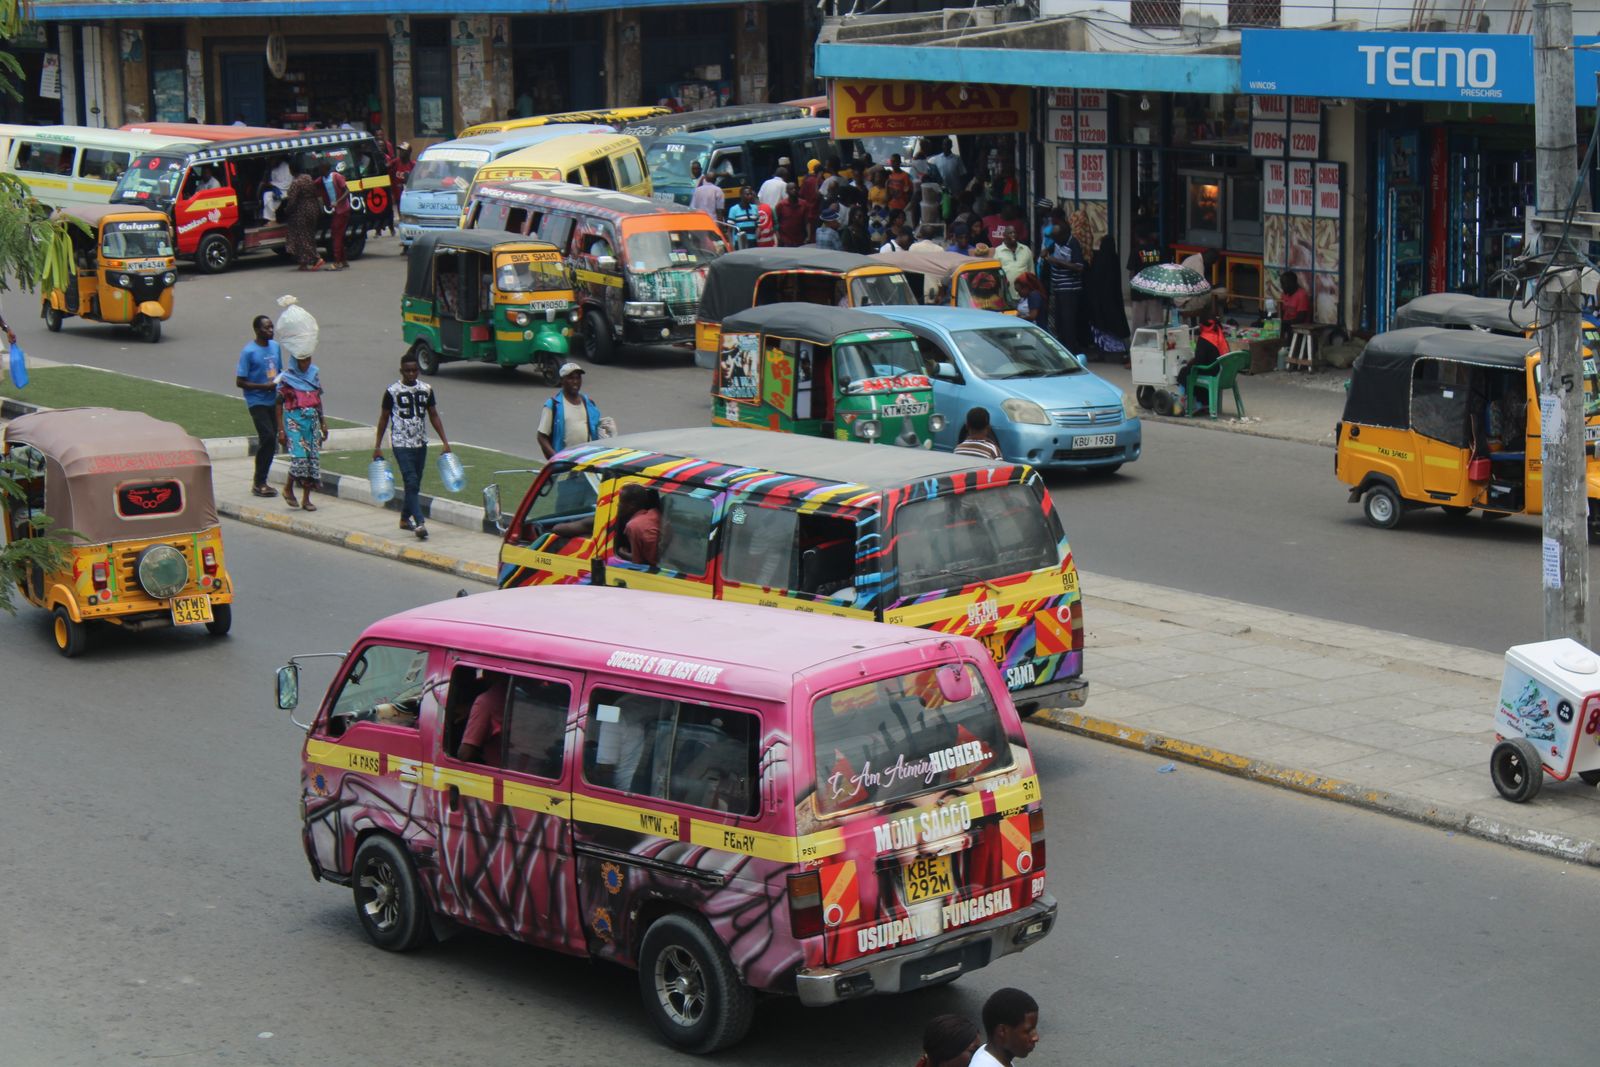 Kenya's failed cashless payment system for public transport